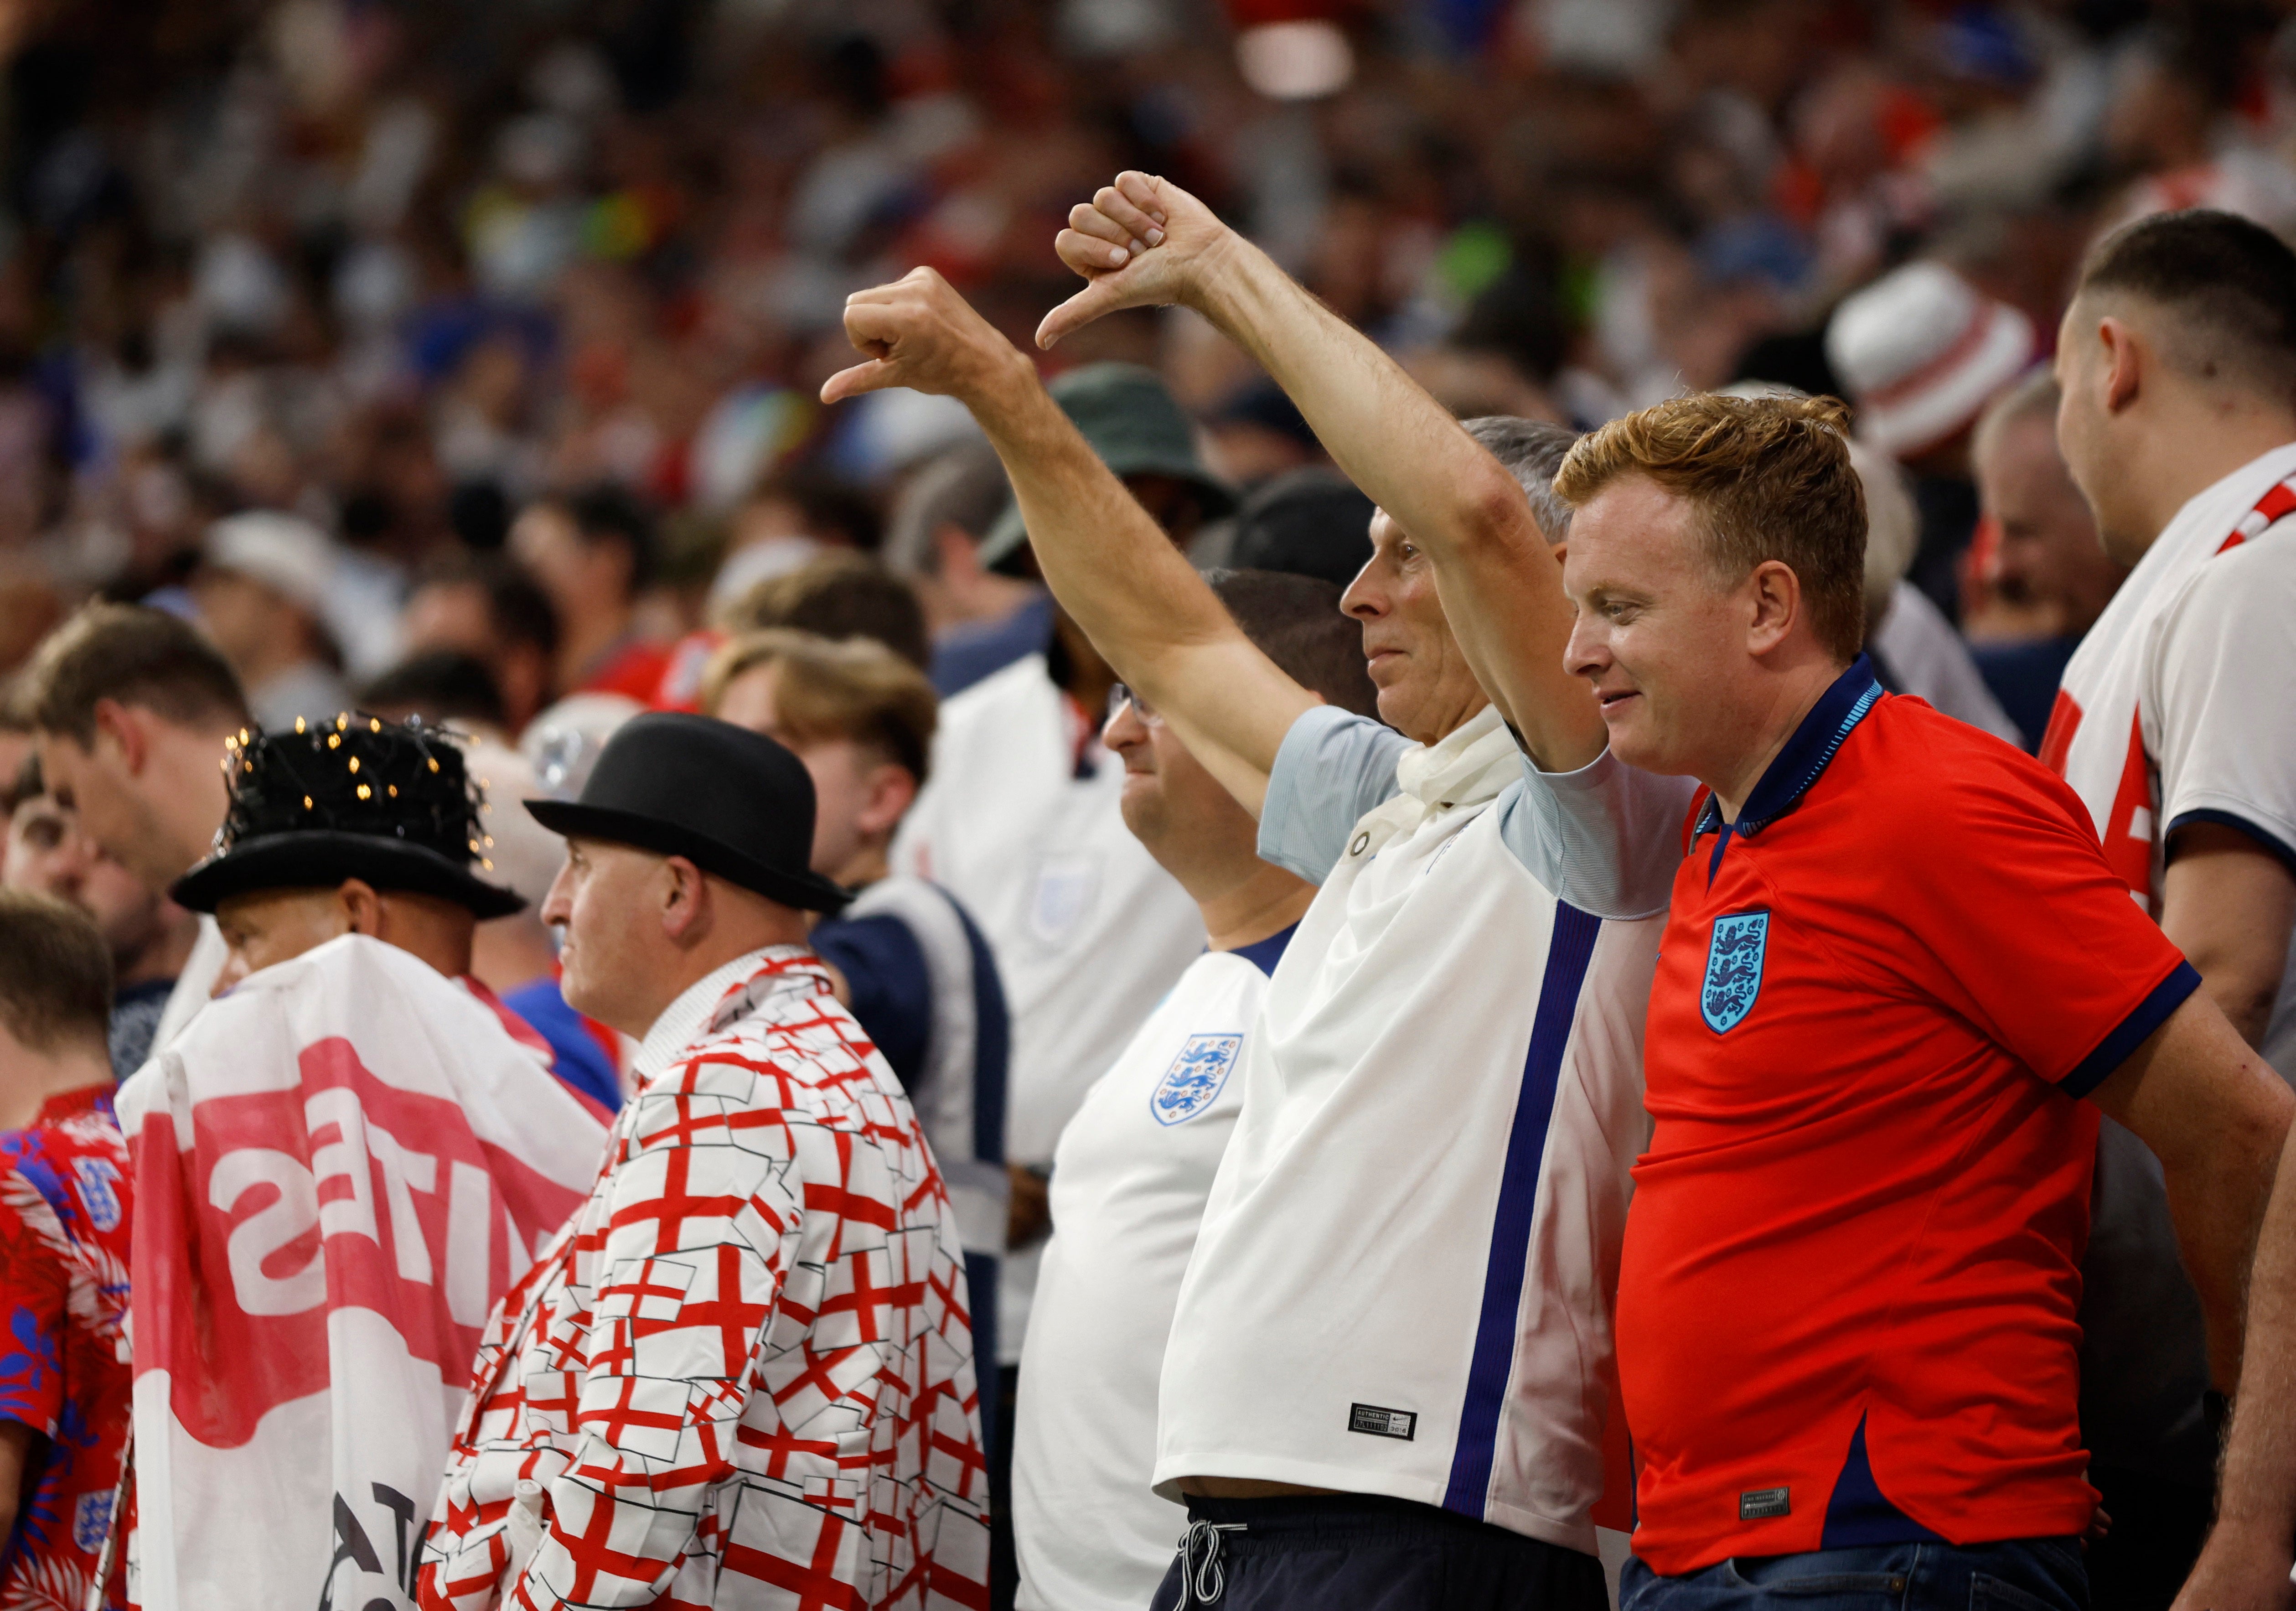 England fans react to their draw with USA